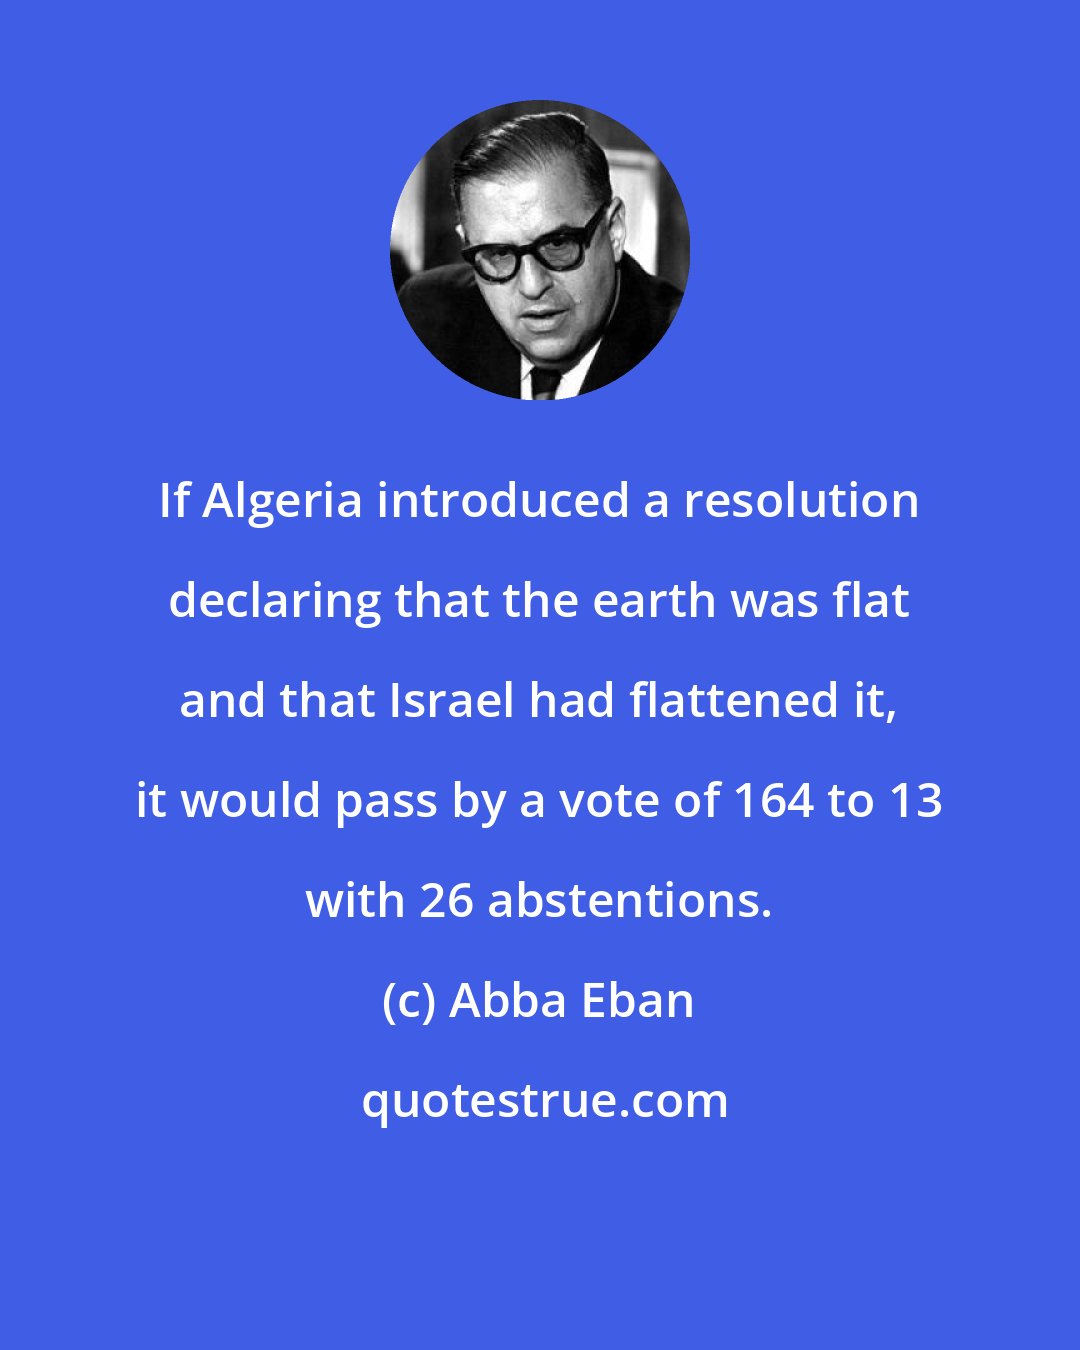 Abba Eban: If Algeria introduced a resolution declaring that the earth was flat and that Israel had flattened it, it would pass by a vote of 164 to 13 with 26 abstentions.